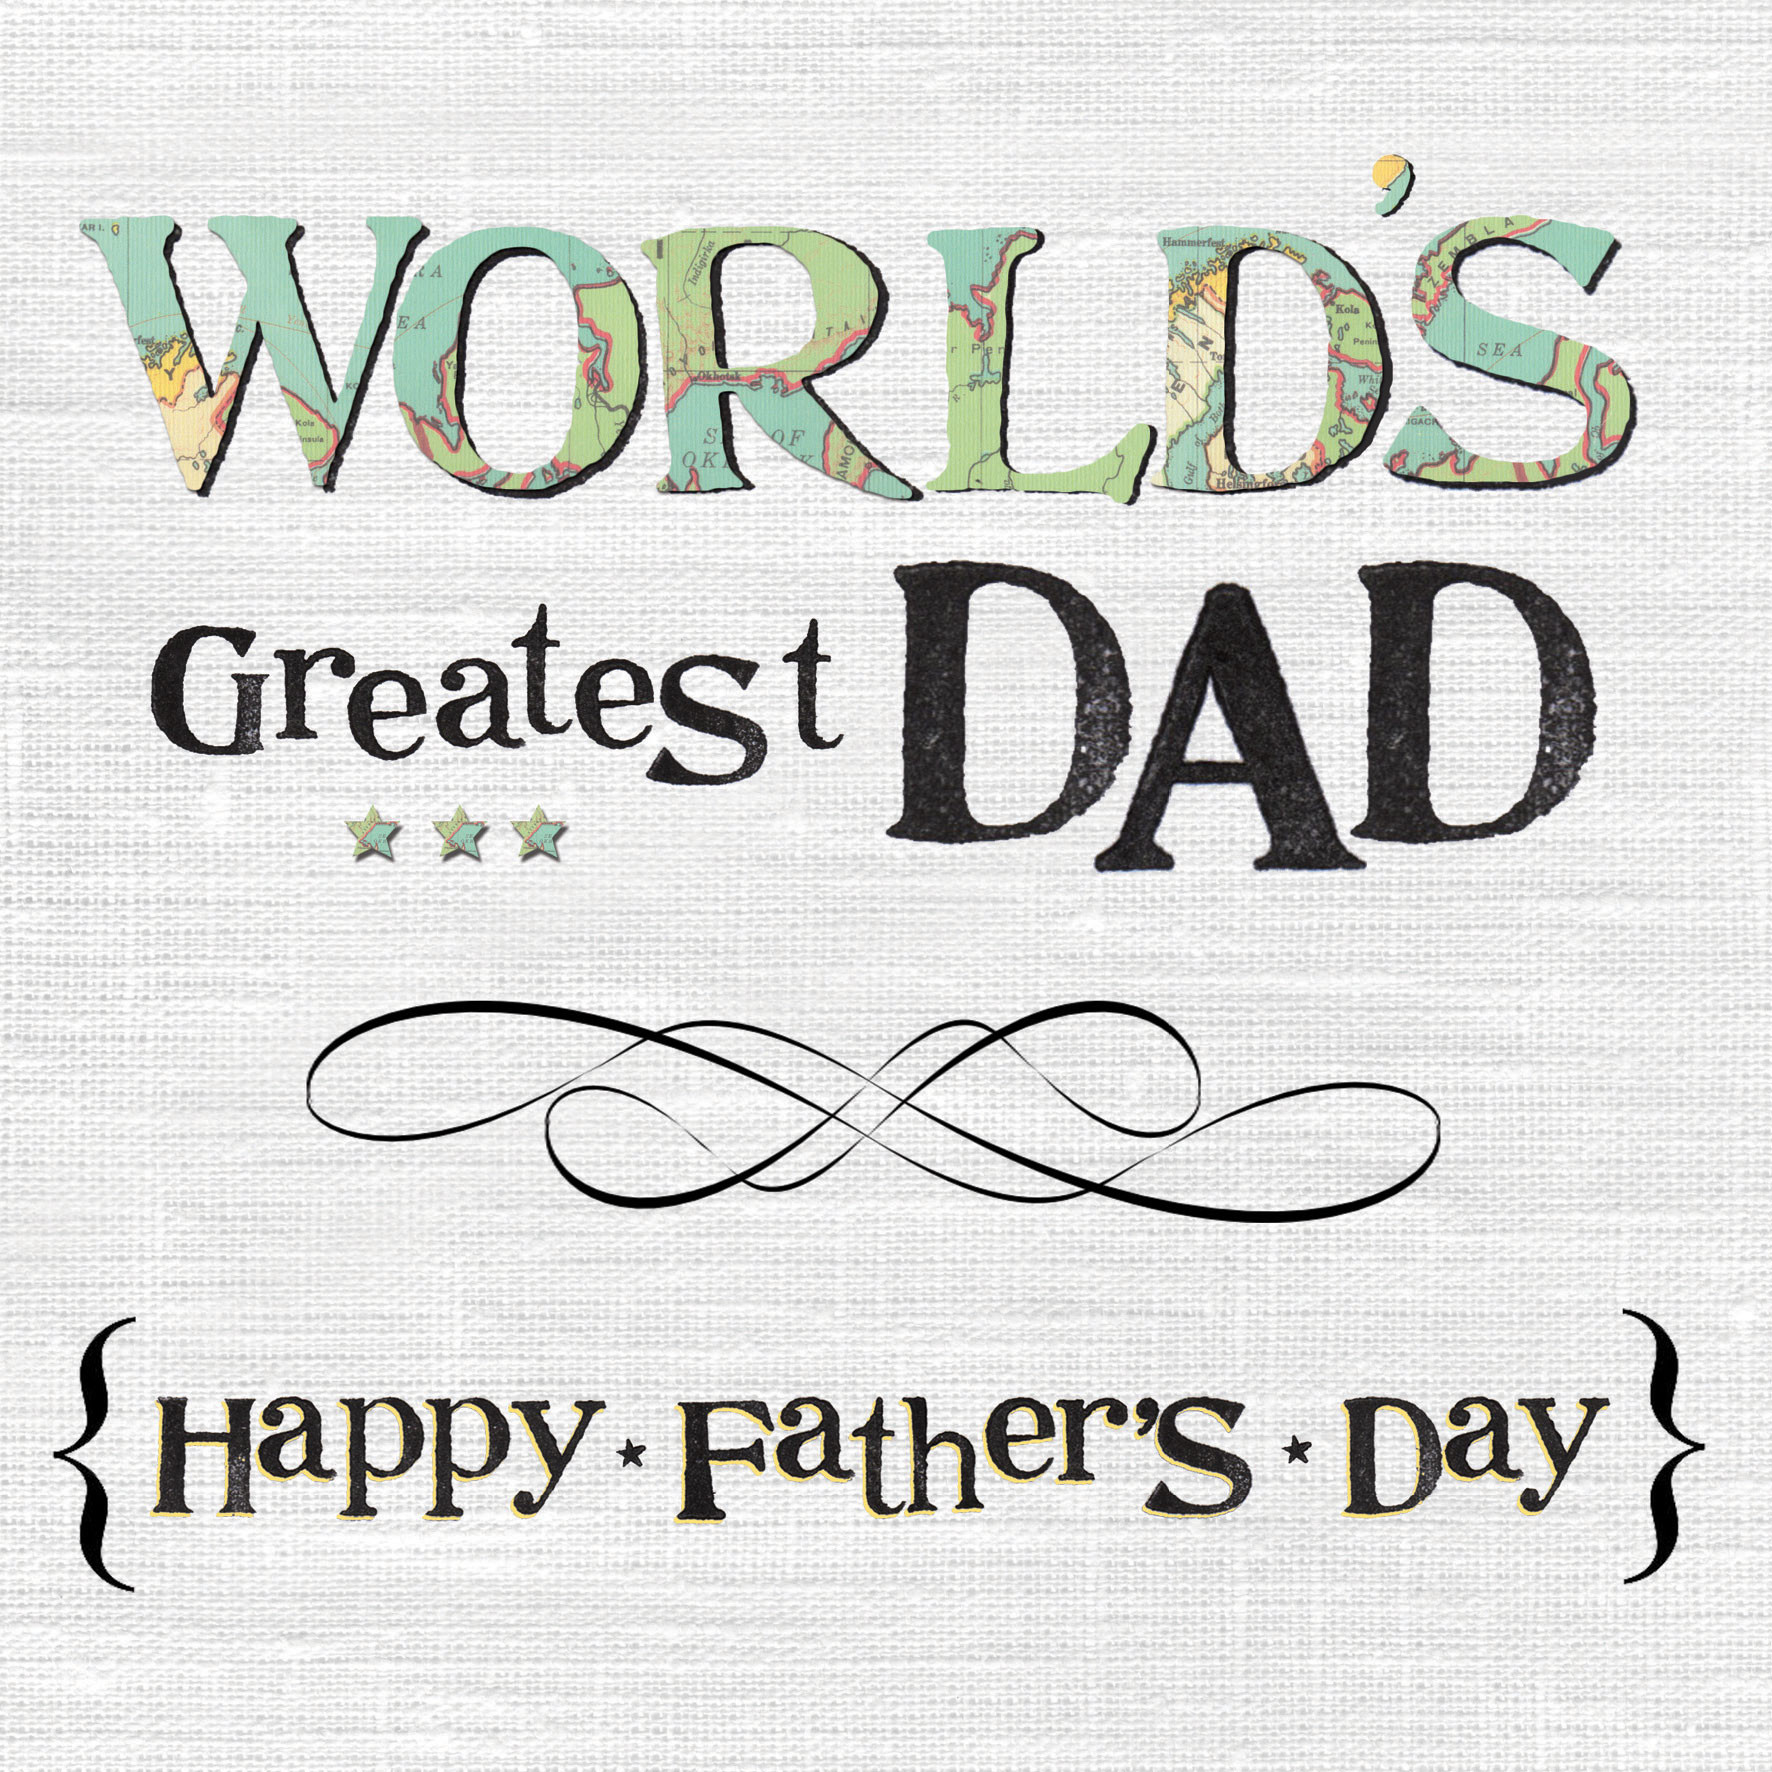 Happy Fathers Day Pics And Quotes
 Happy Fathers Day 2015 Wallpapers Quotes Wishes SMS